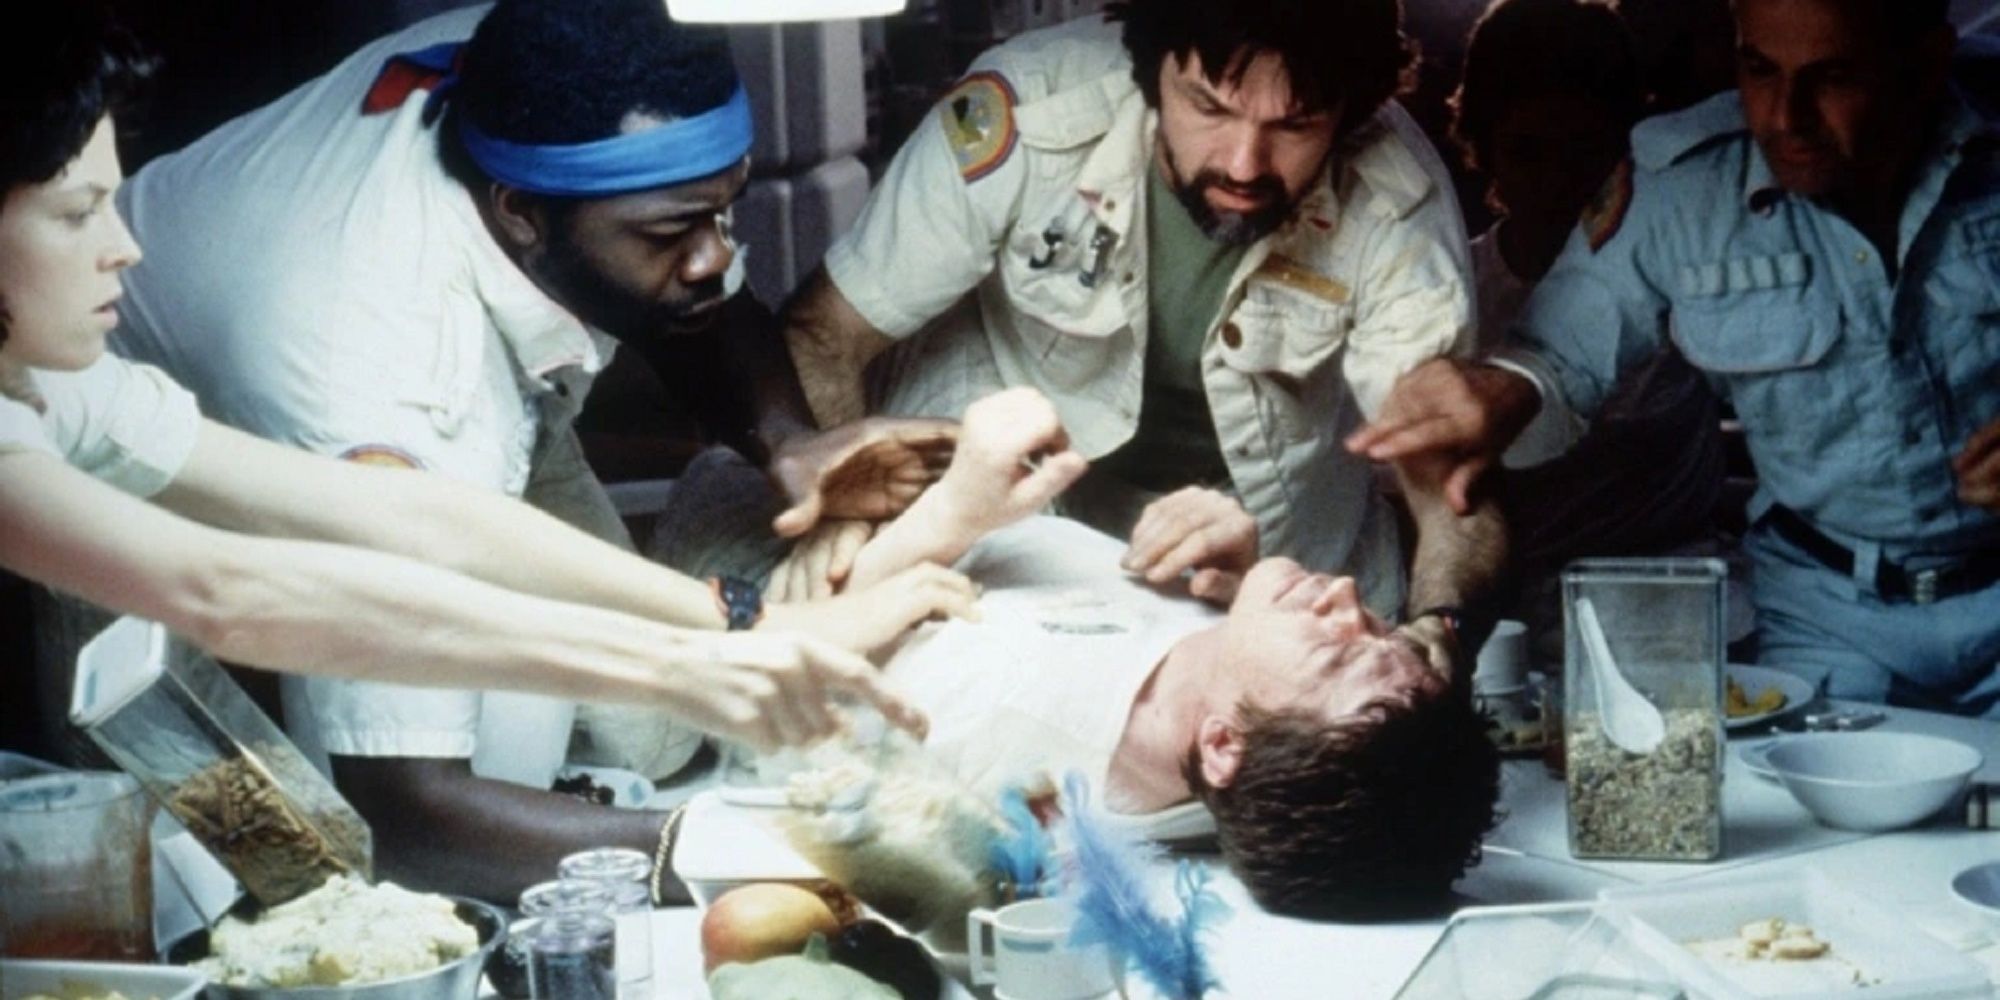 Several people gathered around a man lying on a table in the film Alien